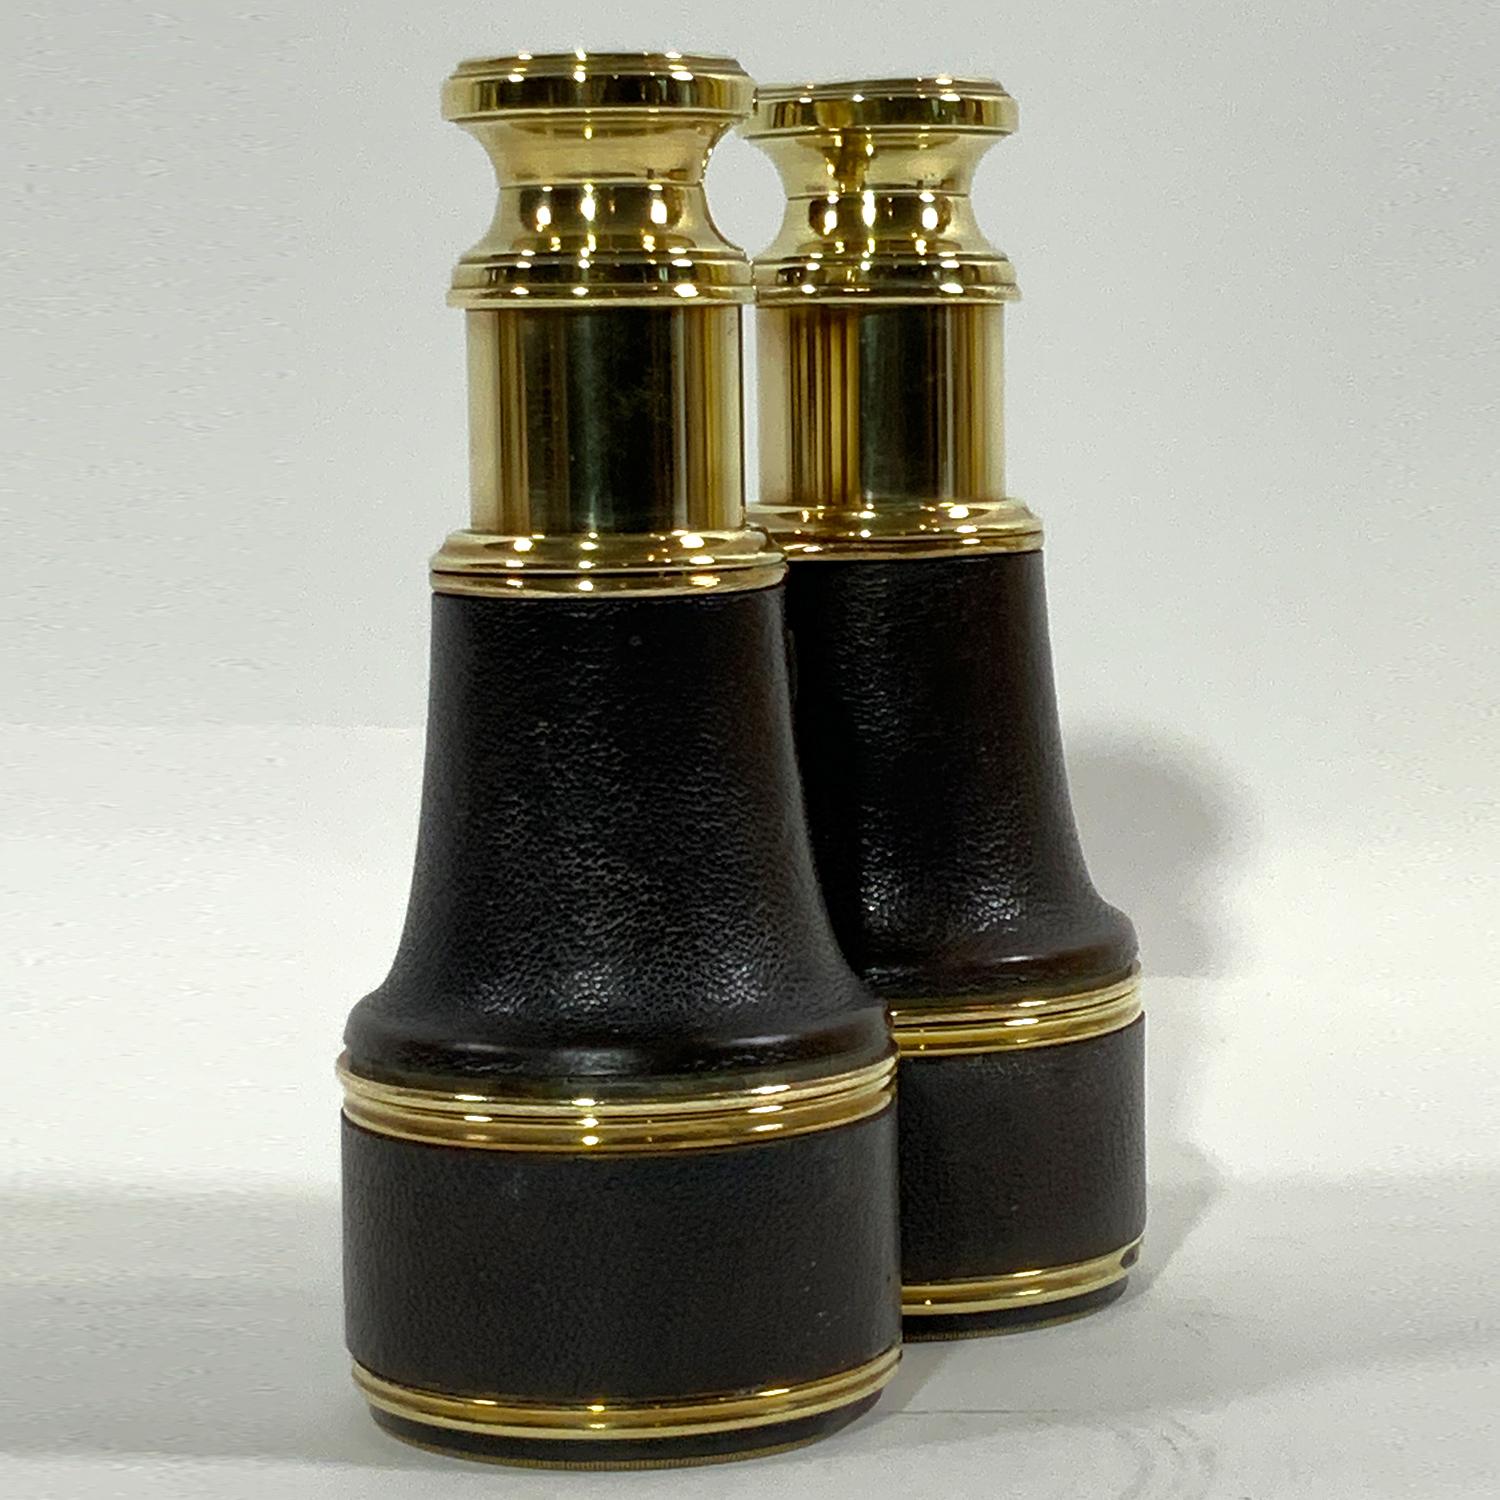 Polished Leather Covered Brass Yachting Binoculars